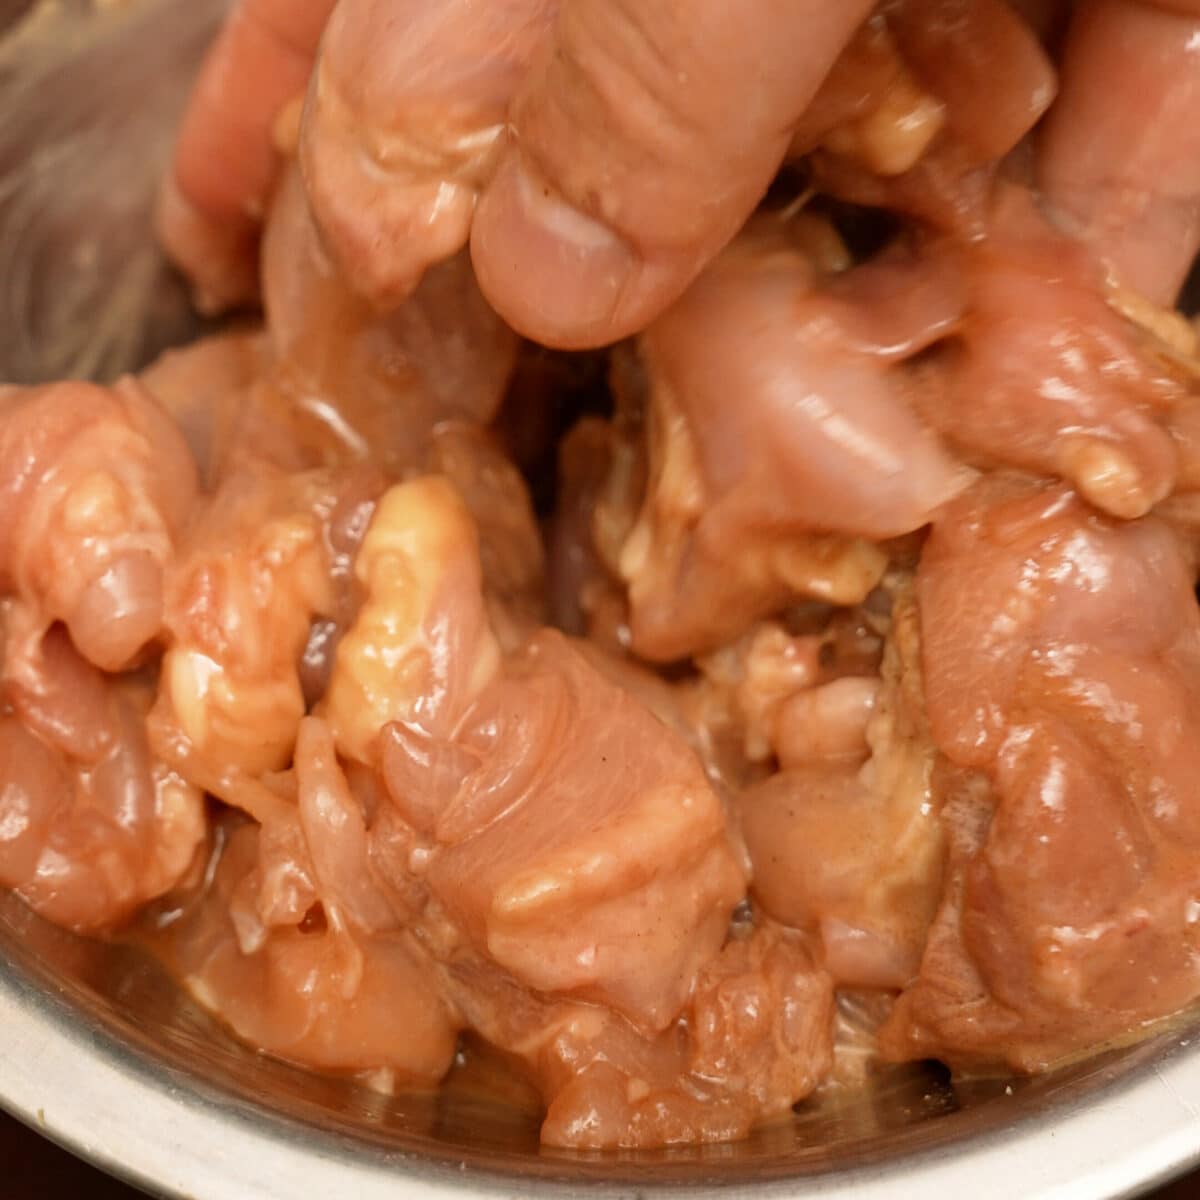 Chicken marinating in a metal bowl.